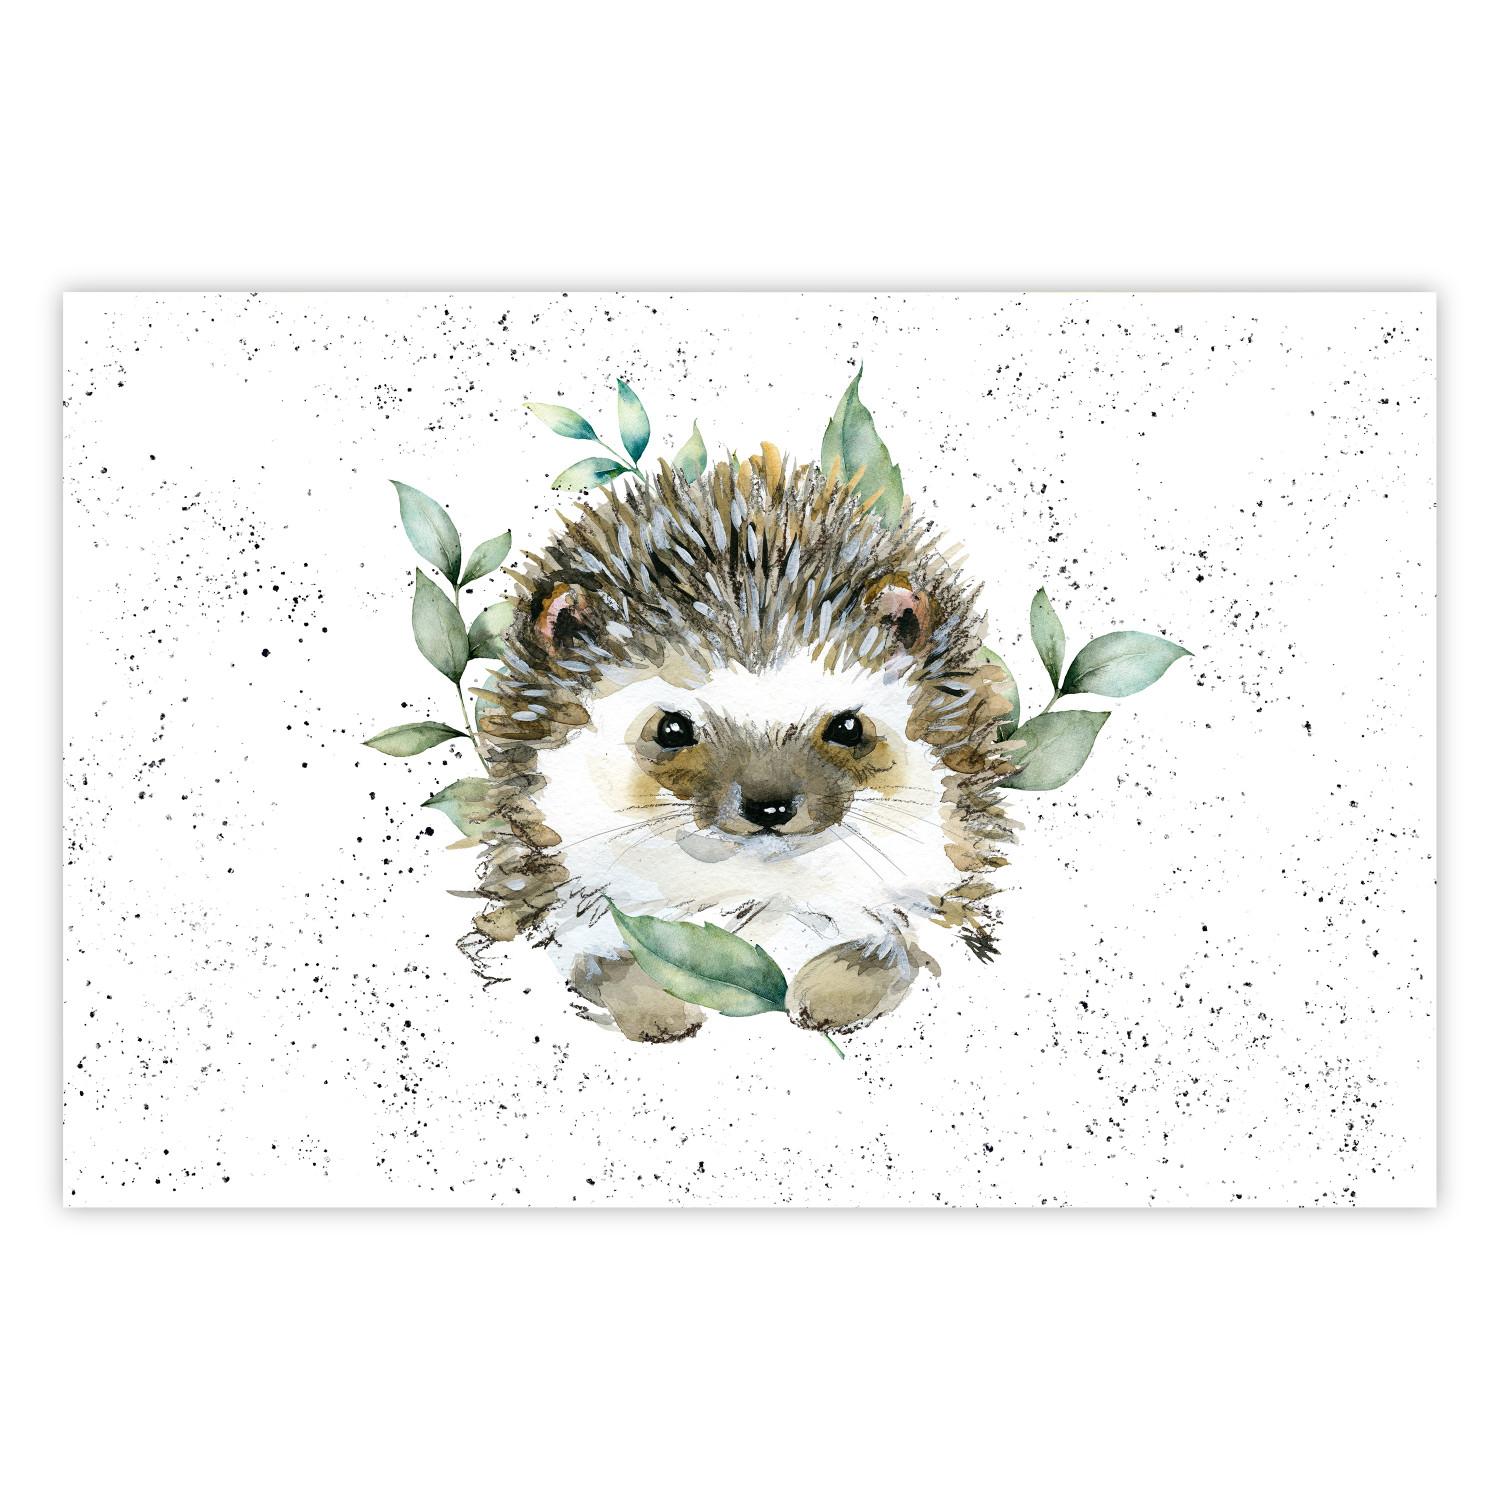 Poster Hedgehog - Cute Painted Animals and Plants on a Polka Dot Background